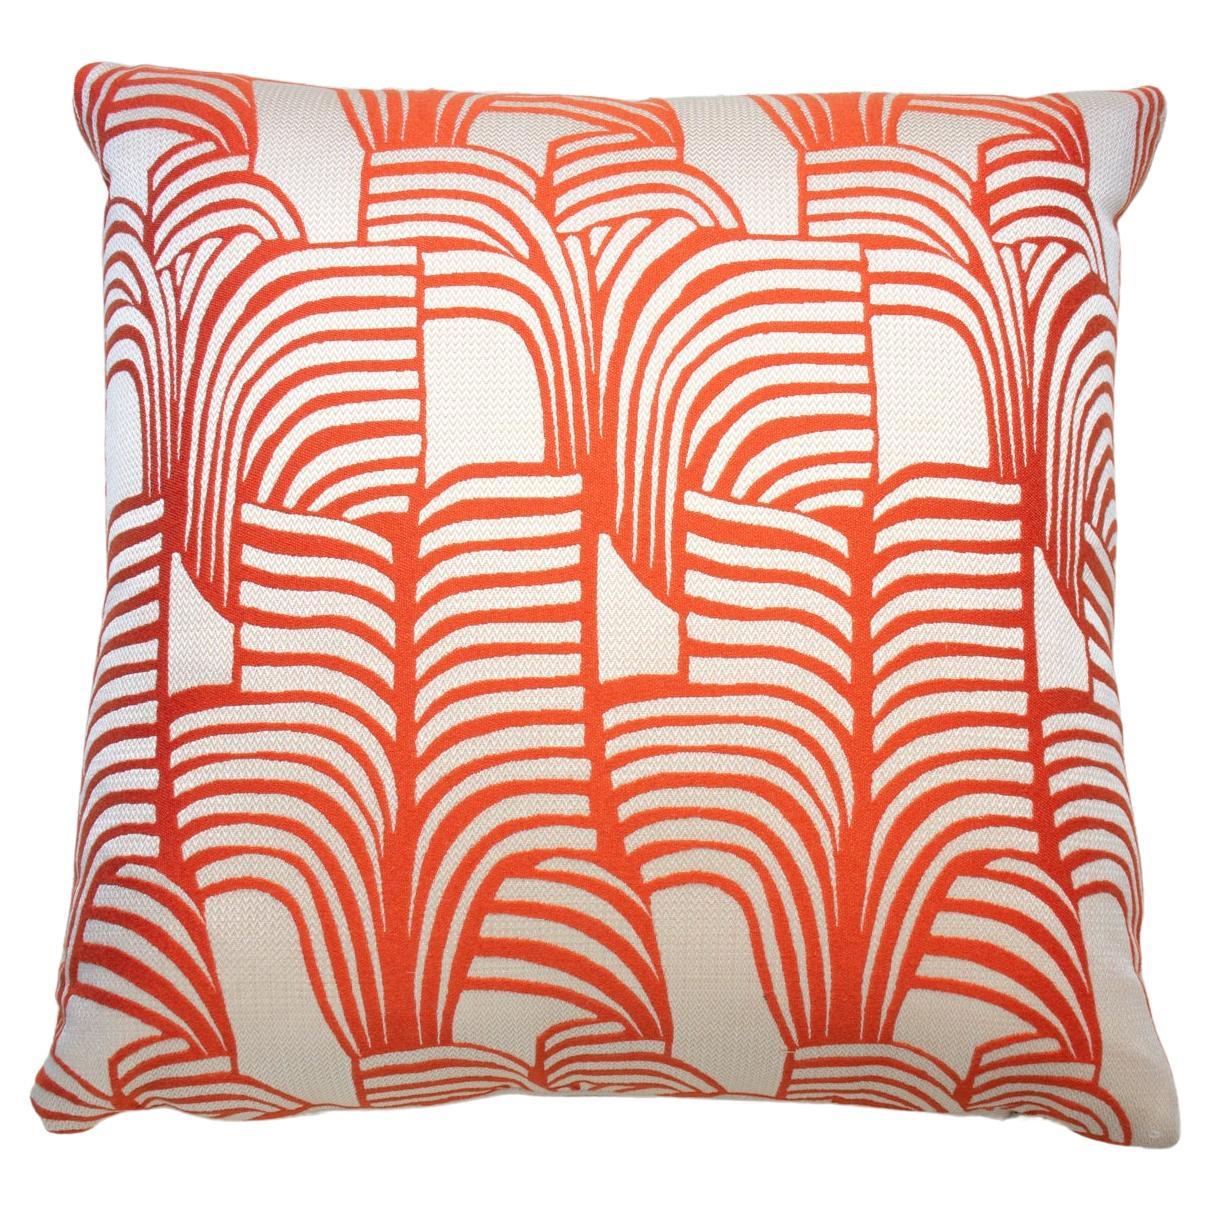 Introducing the exquisite limited edition Hermes Fabric Zebrures, a truly exceptional piece that encapsulates the essence of luxury, craftsmanship, and timeless beauty. Meticulously crafted using discontinued Hermes fabrics, these pillows are a